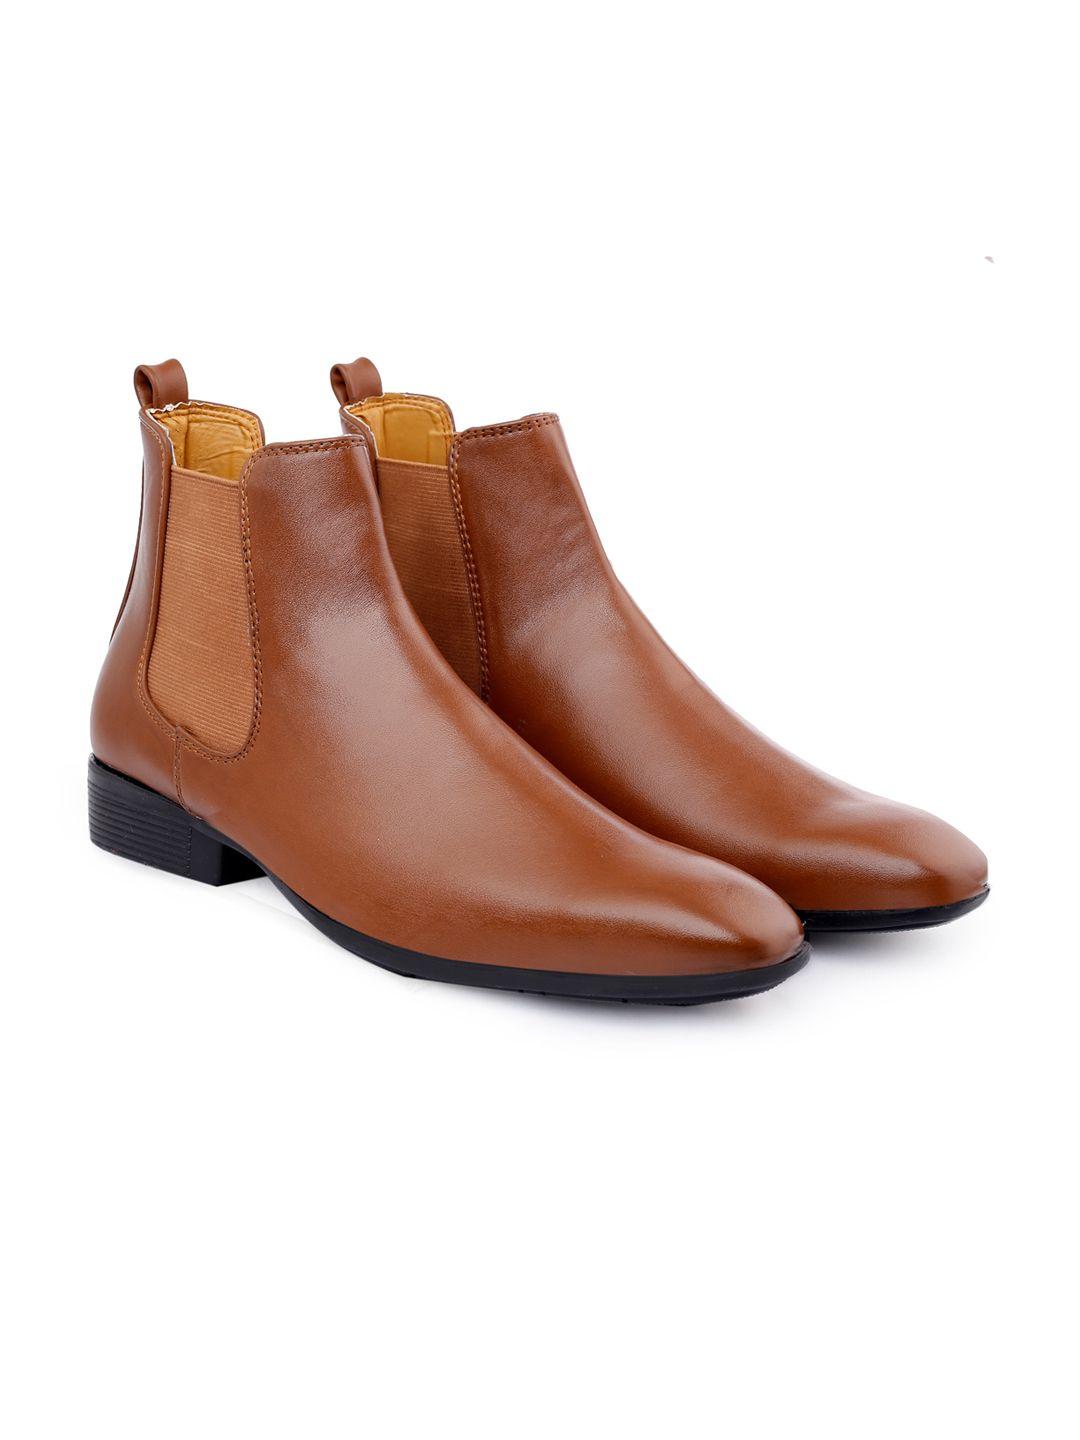 the roadster lifestyle co. men slip on chelsea boots